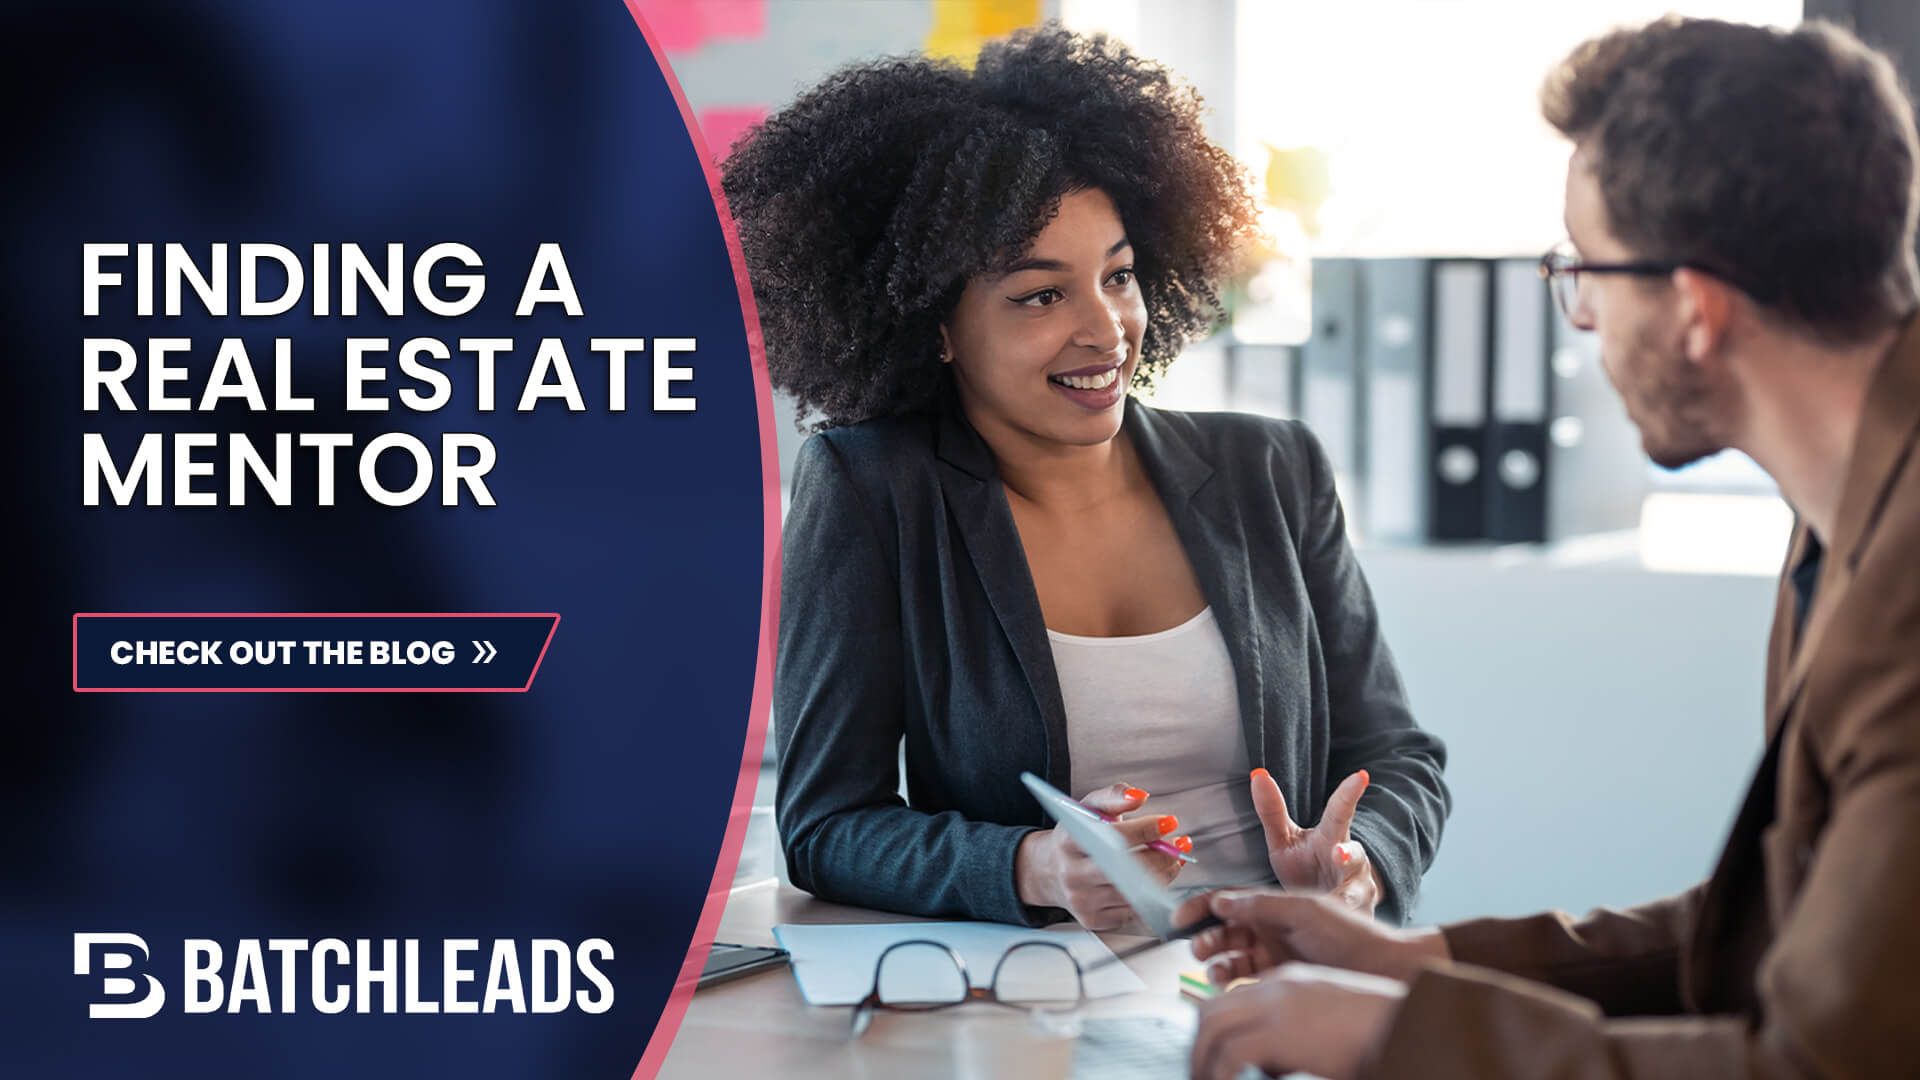 FINDING A REAL ESTATE MENTOR